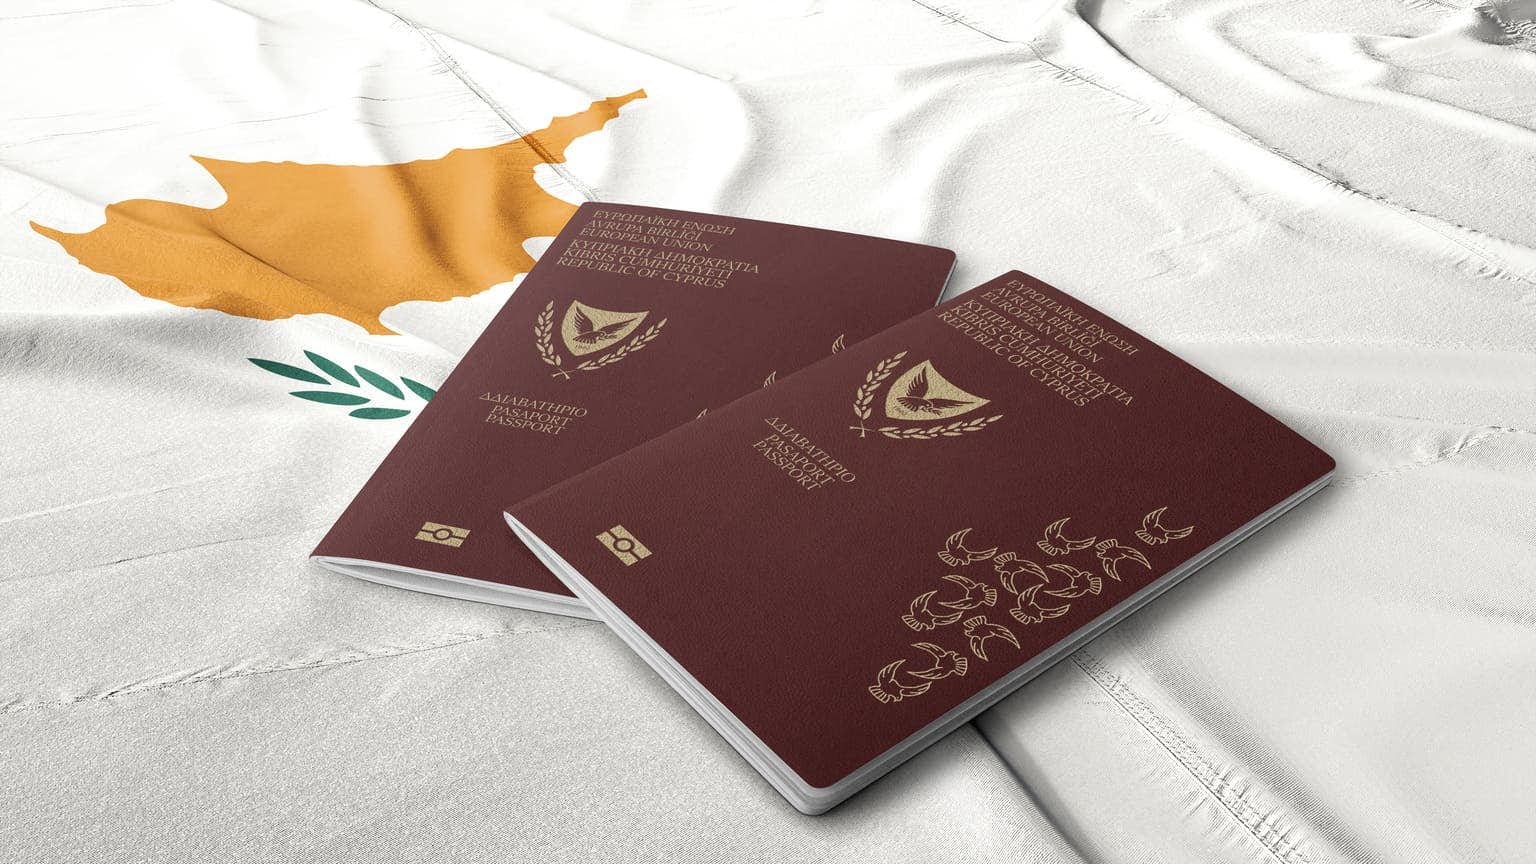 Cyprus citizenship: passport benefits and expenses for obtaining